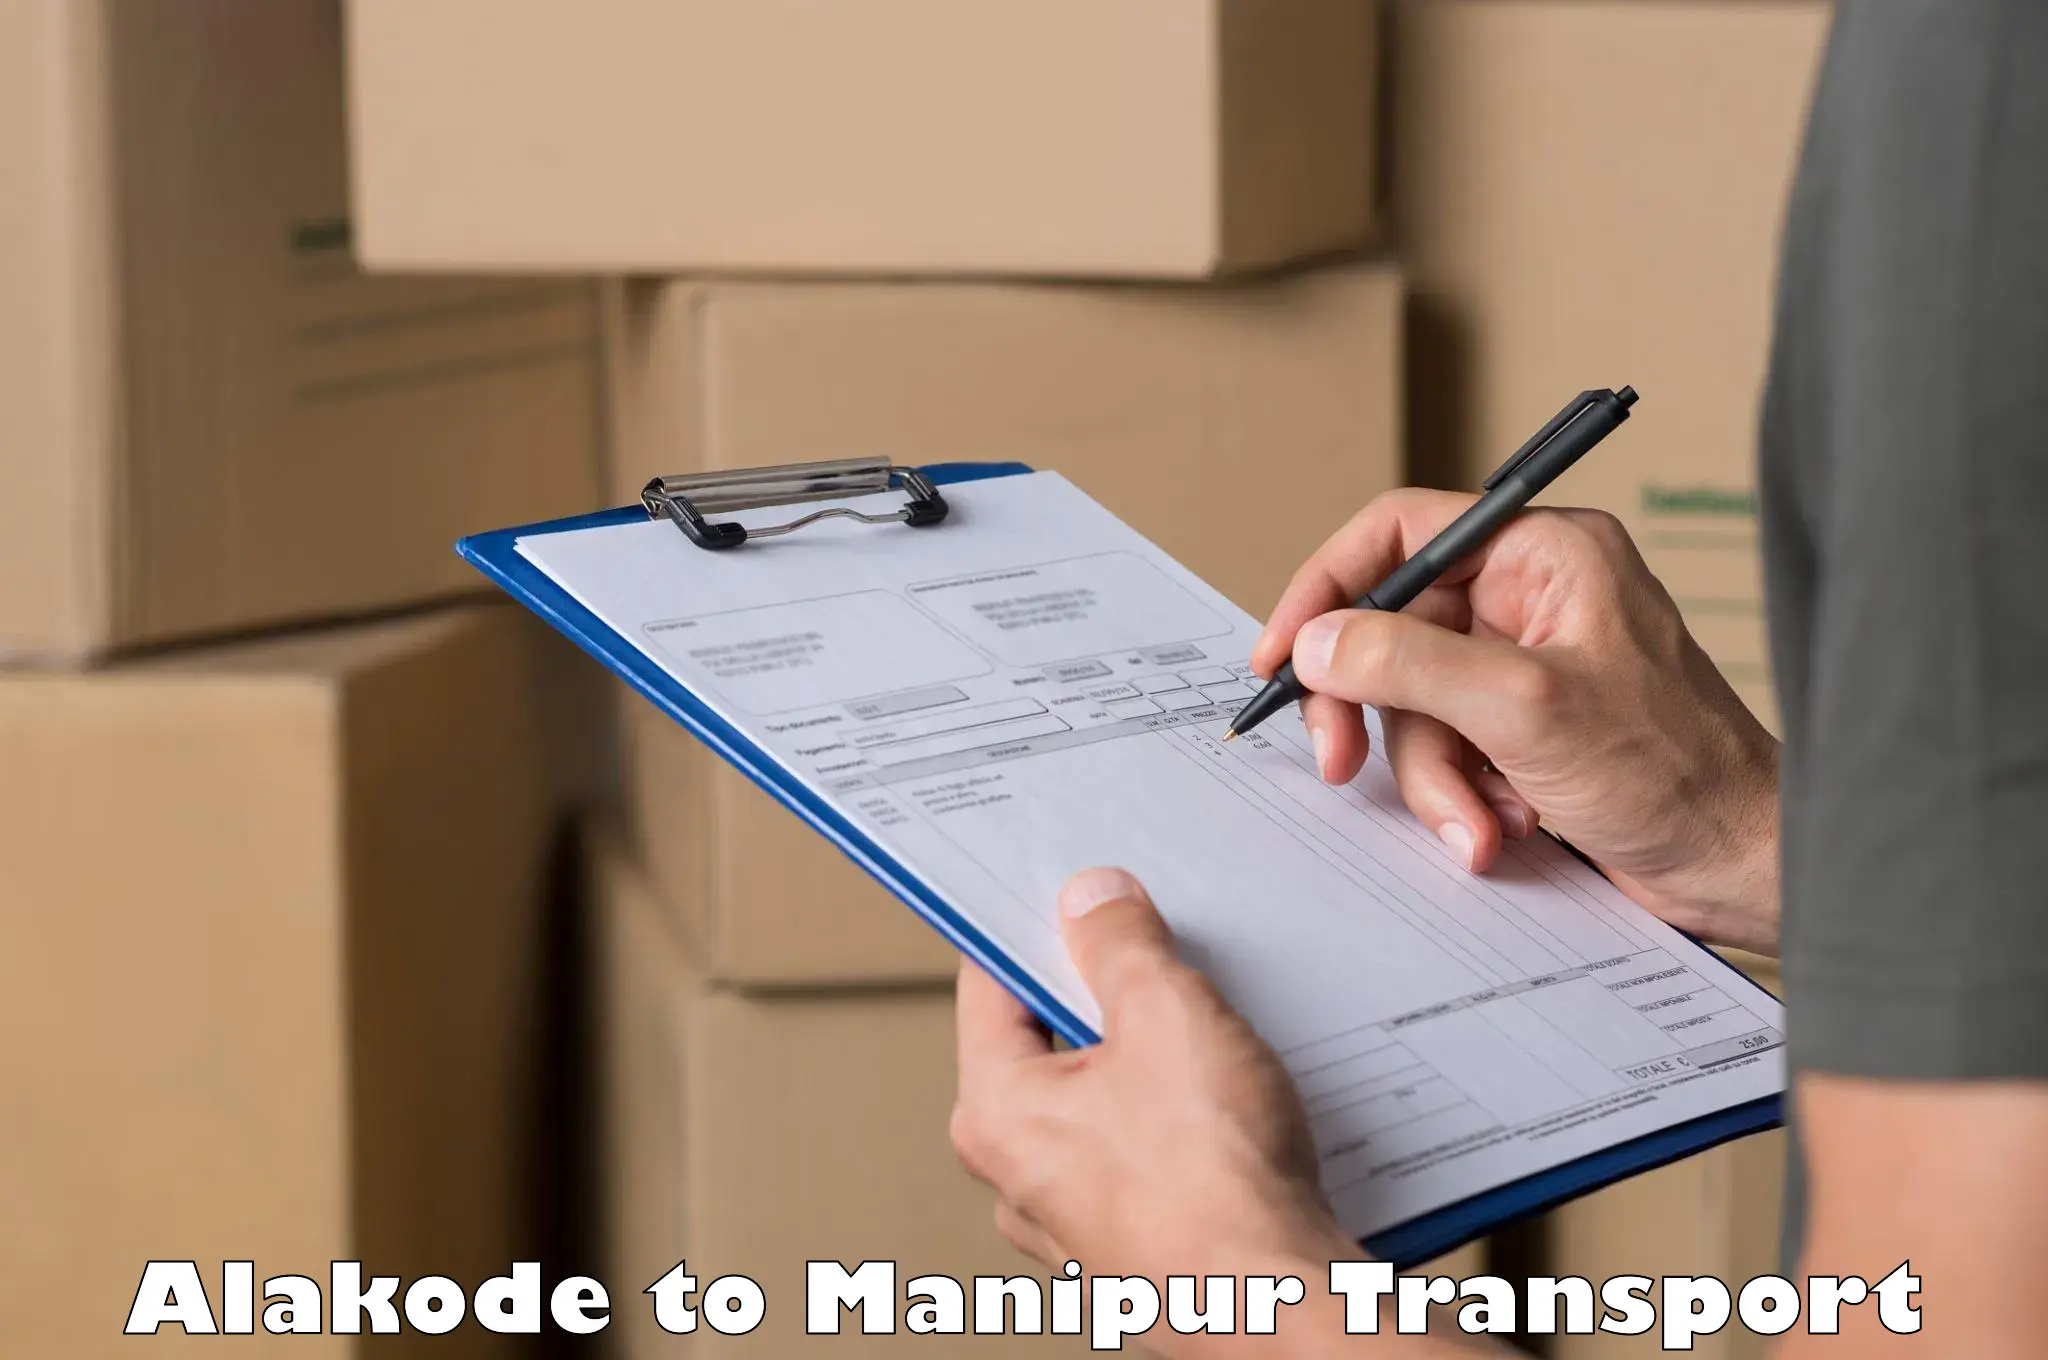 Delivery service Alakode to Manipur